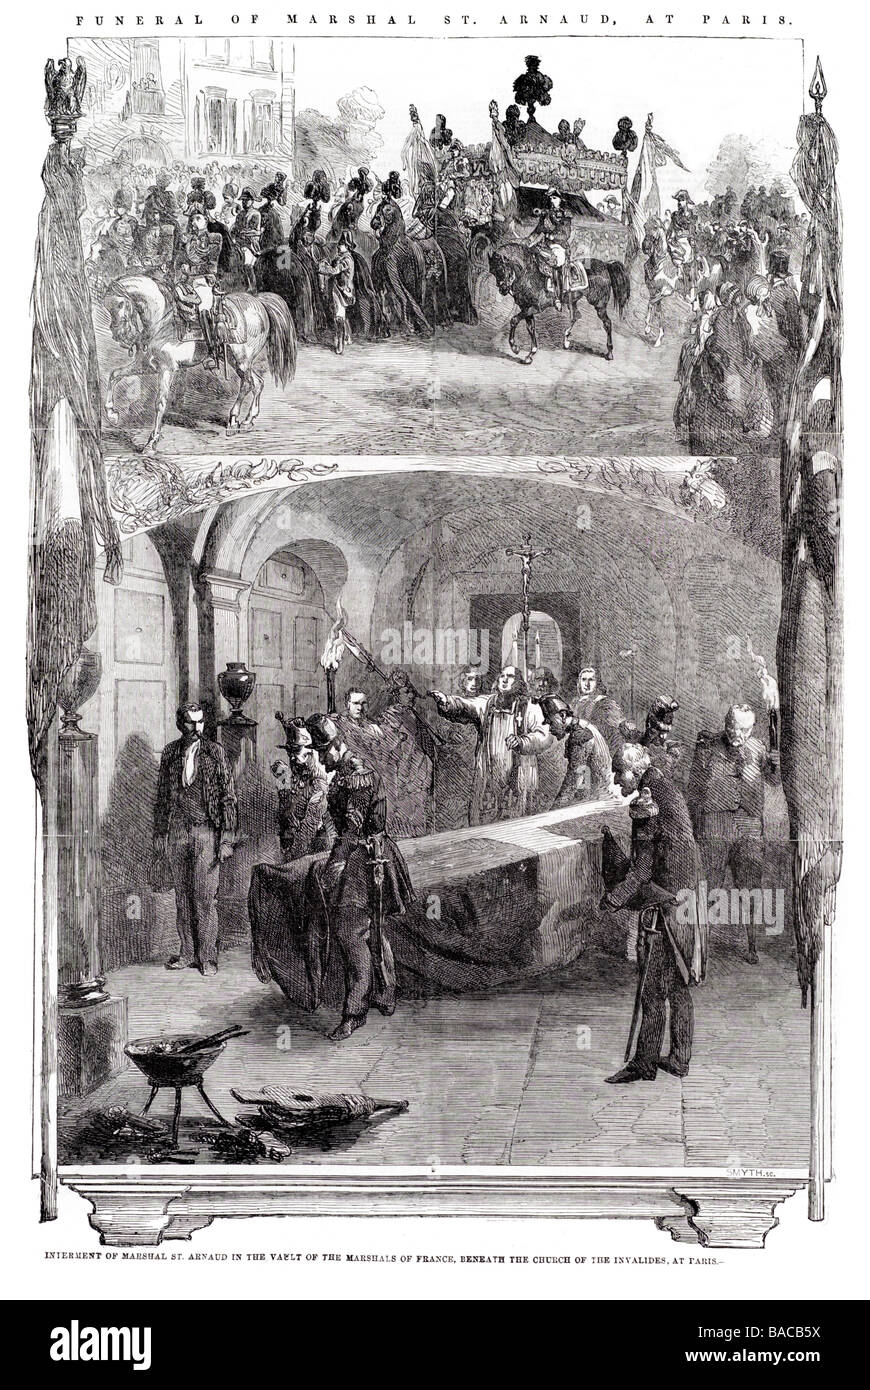 interment of marshal st arnaud in the vault of the marshals of france beneath the church invalides at paris 1854 Stock Photo